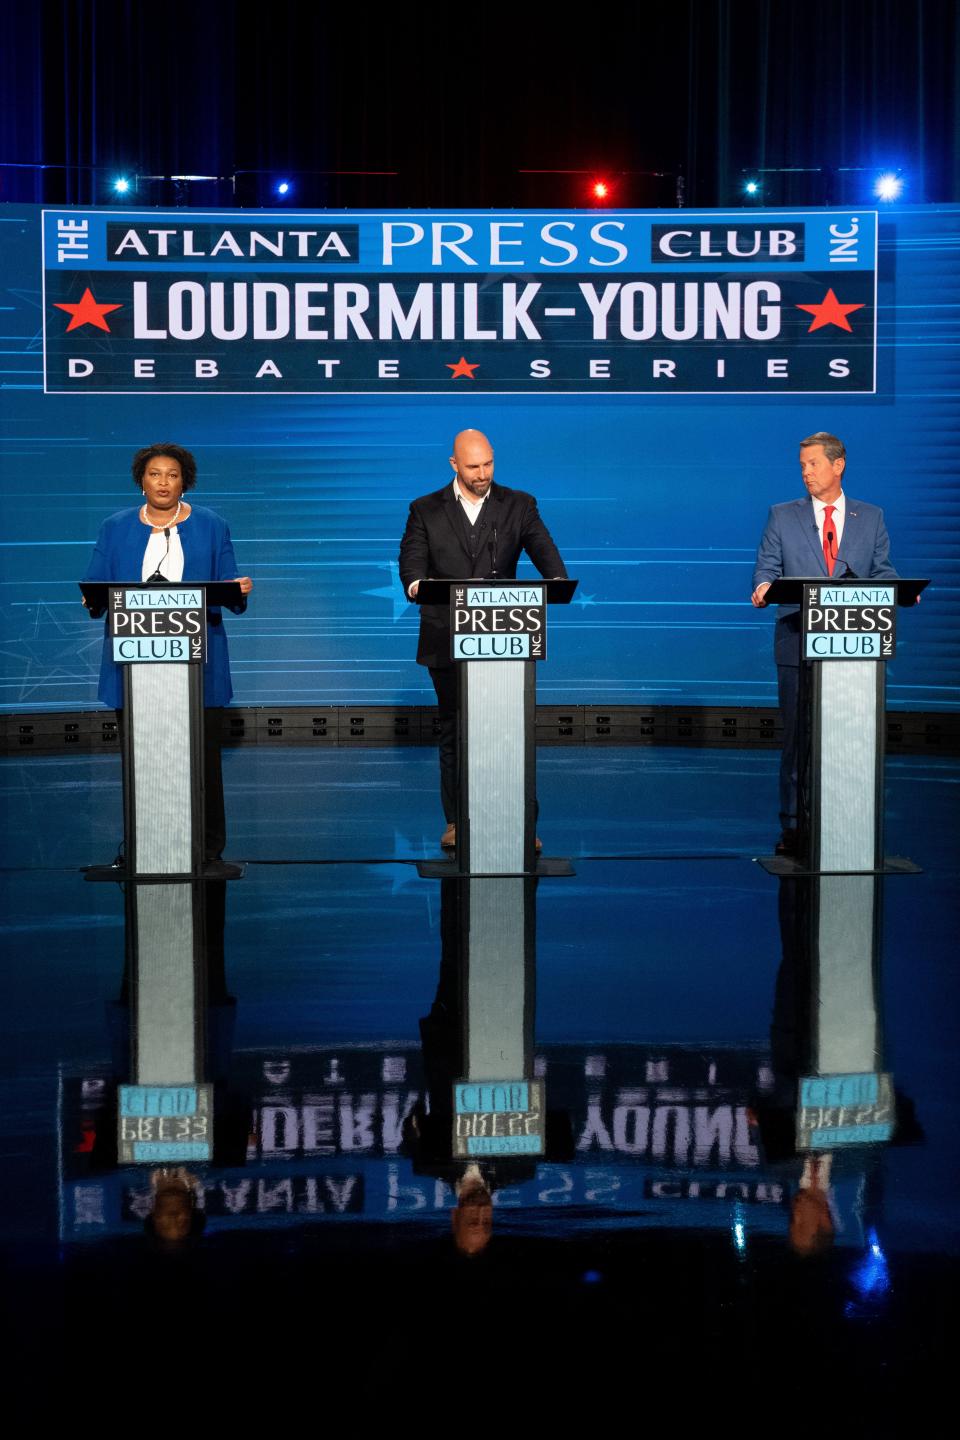 From the left: Stacey Abrams, Shane Hazel and Brian Kemp at the Loudermilk-Young debate.